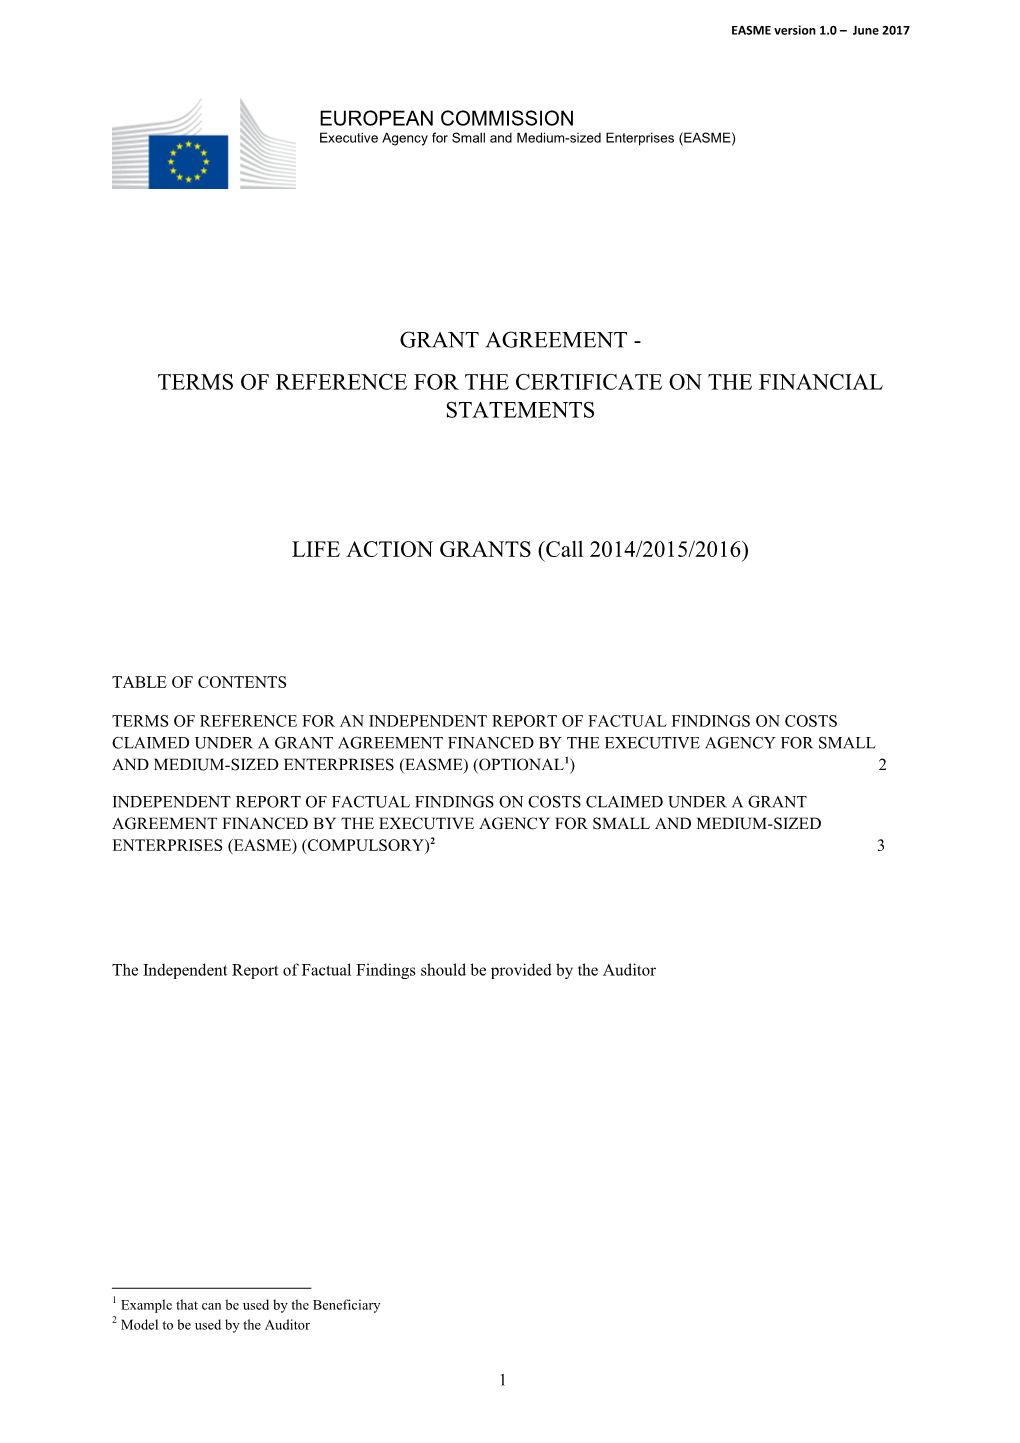 Terms of Reference for the Certificate on the Financial Statements